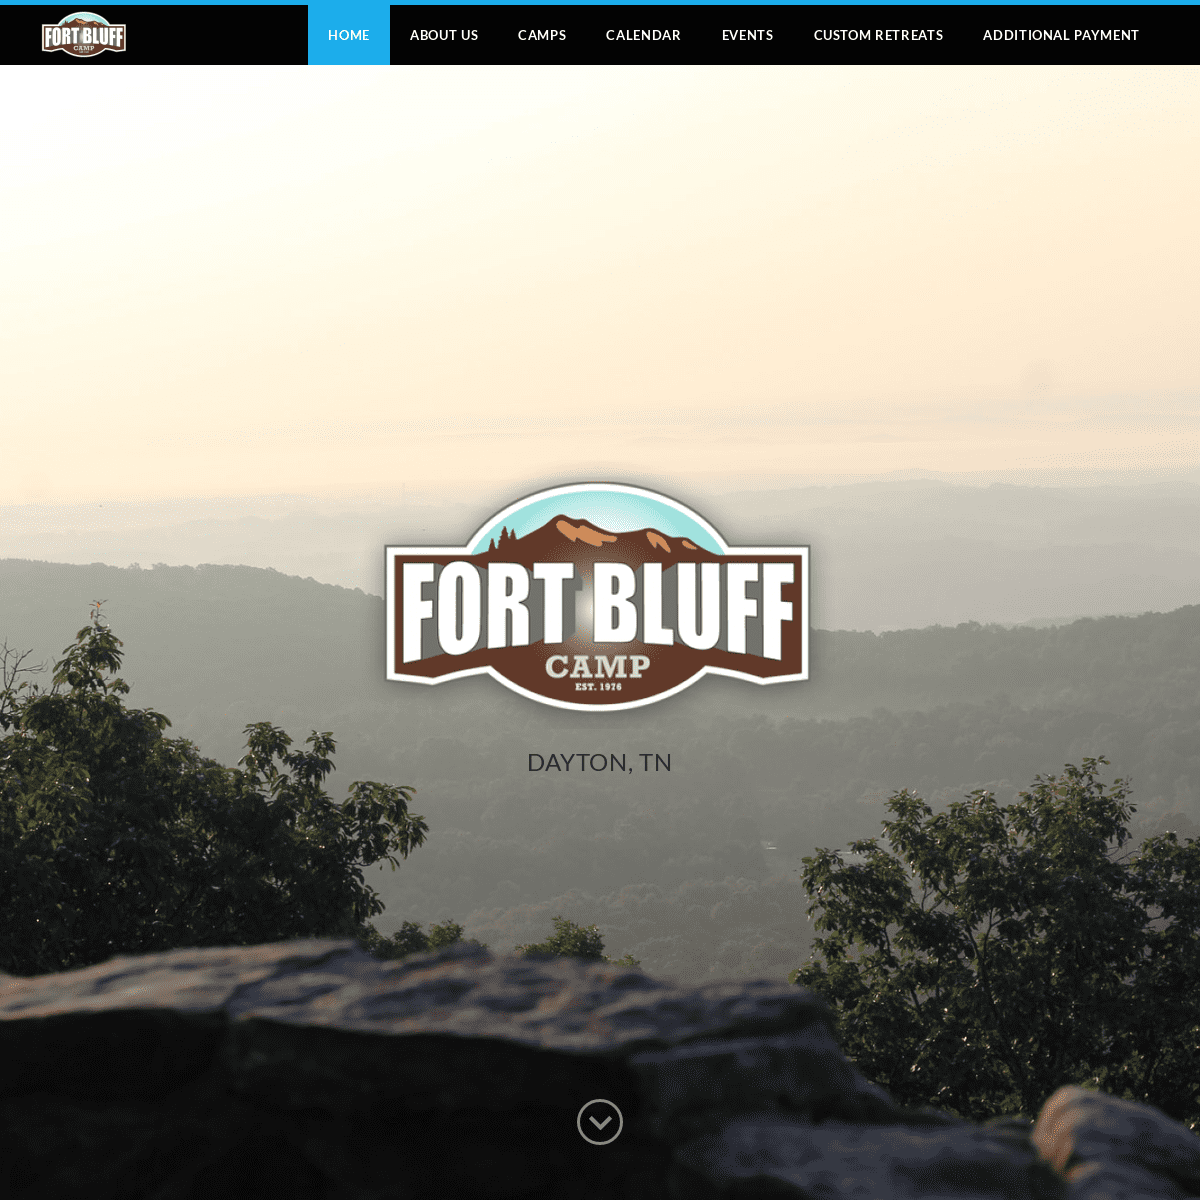 Fort Bluff Camp - Home